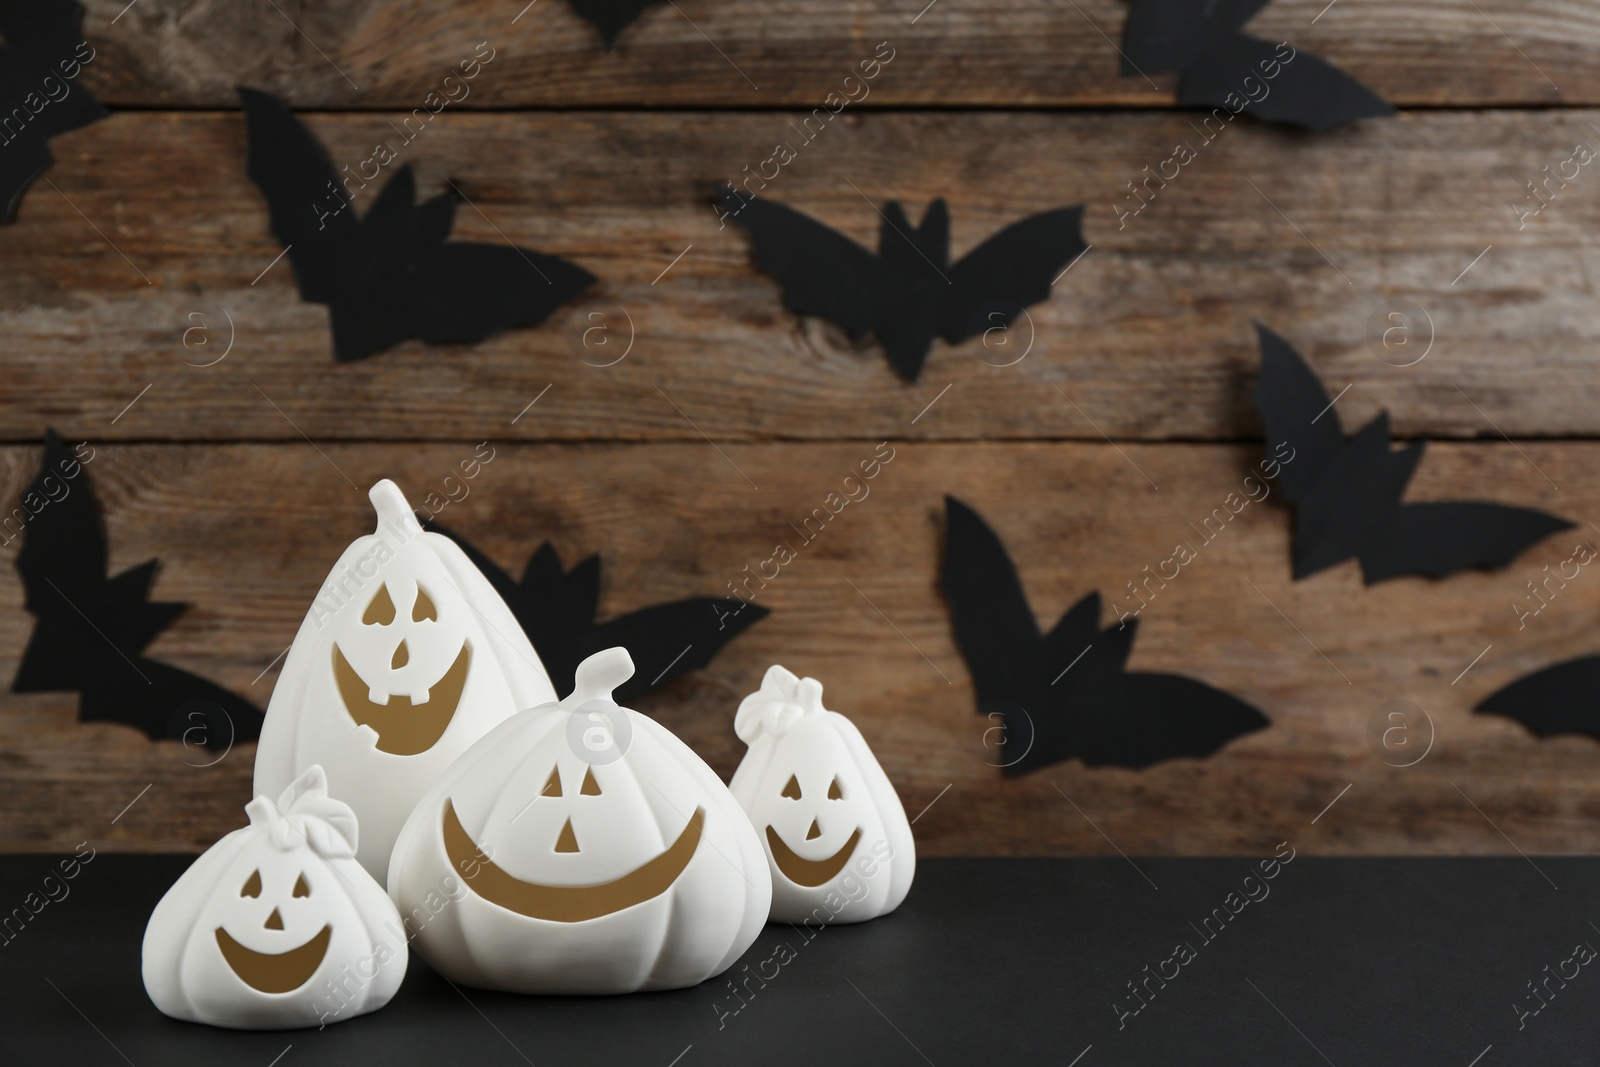 Photo of Jack-o-Lantern candle holders on black table against decorated wooden background. Halloween decor